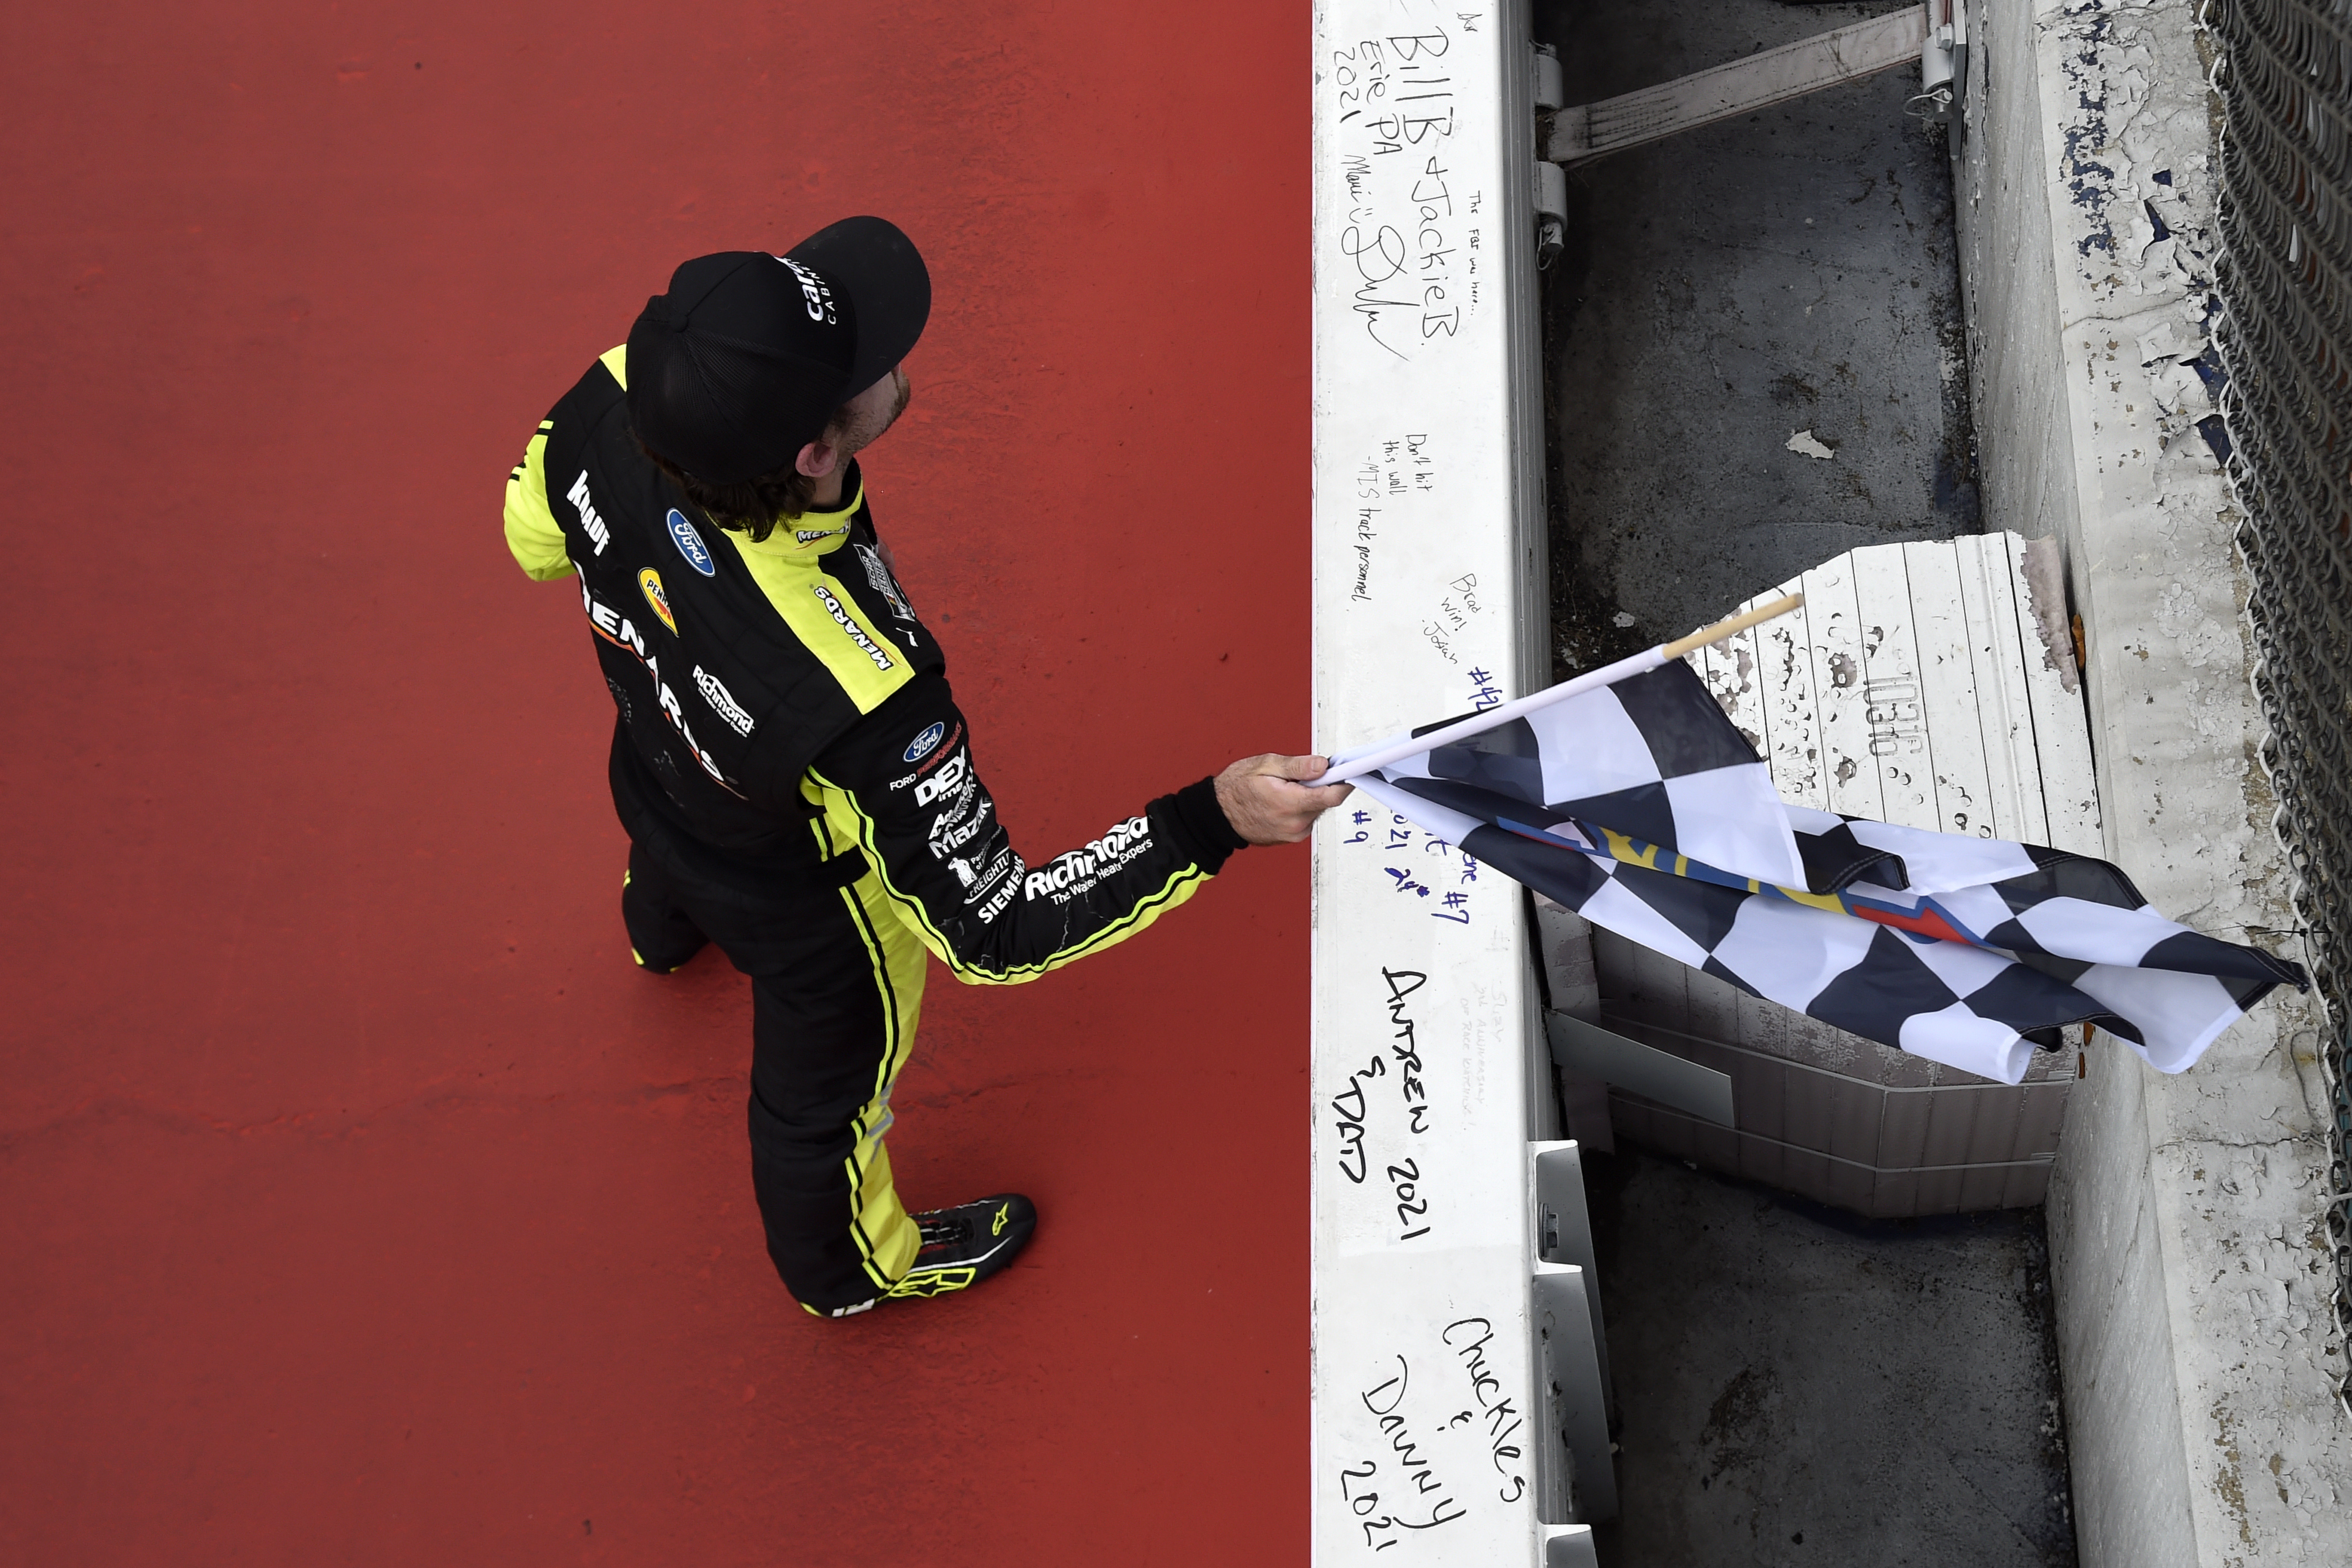 yan Blaney, driver of the #12 Menards/Cardell Cabinetry Ford, celebrates with the checkered flag after winning the NASCAR Cup Series FireKeepers Casino 400 at Michigan International Speedway on August 22, 2021 in Brooklyn, Michigan.